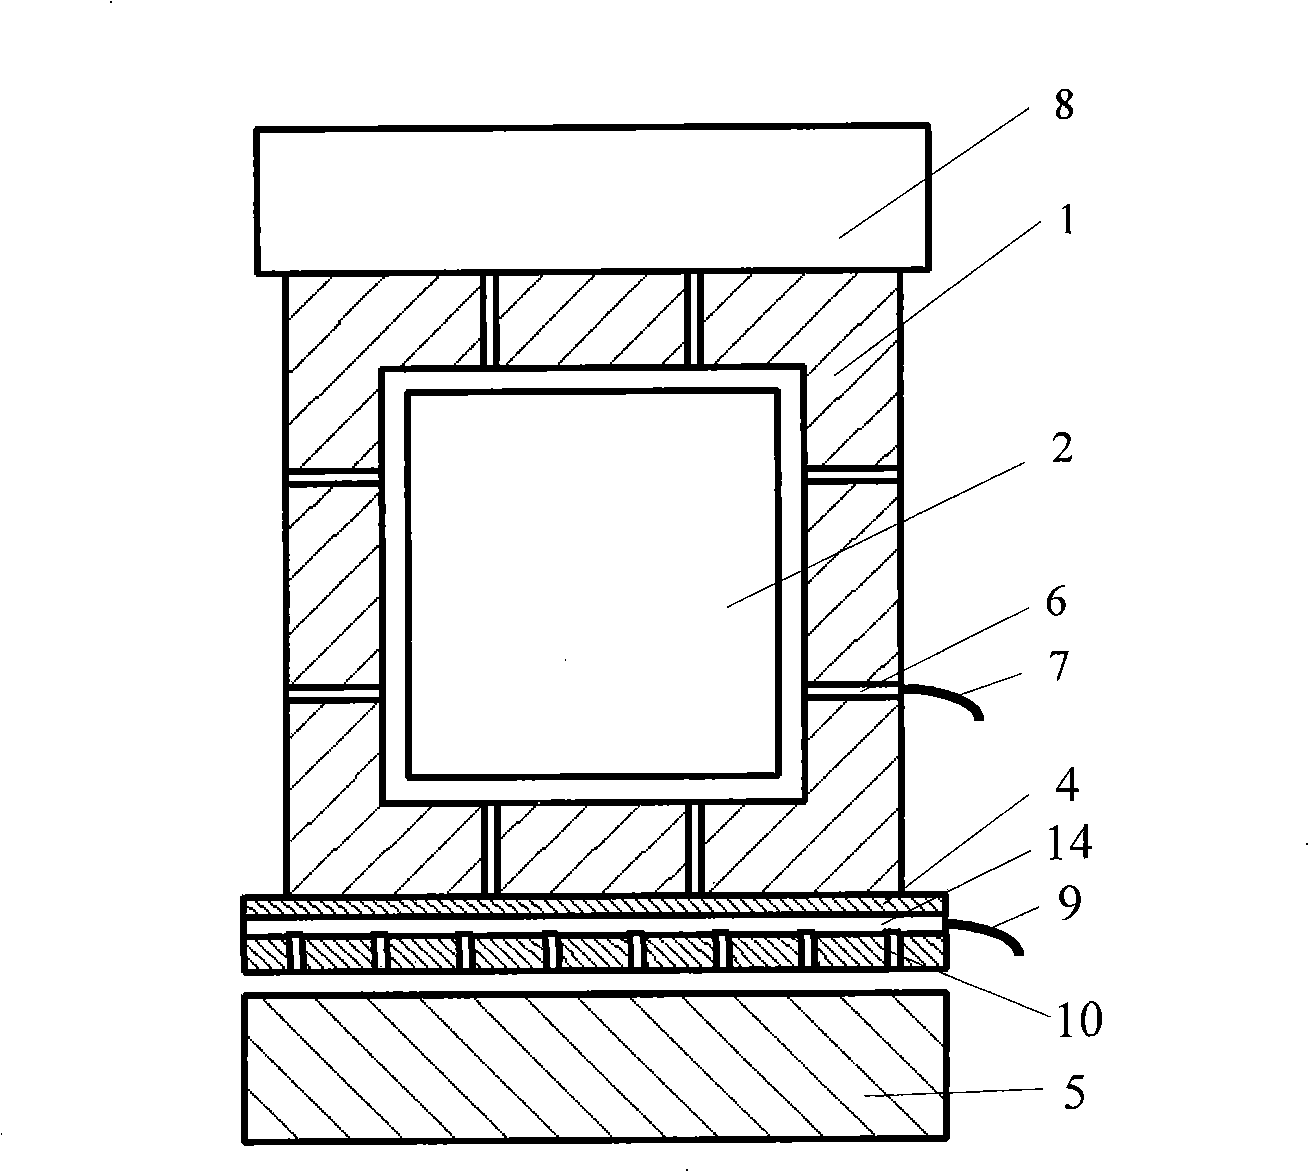 Horizontal gas/gas two-phase composite straight line reference method and apparatus based on gravity force balance